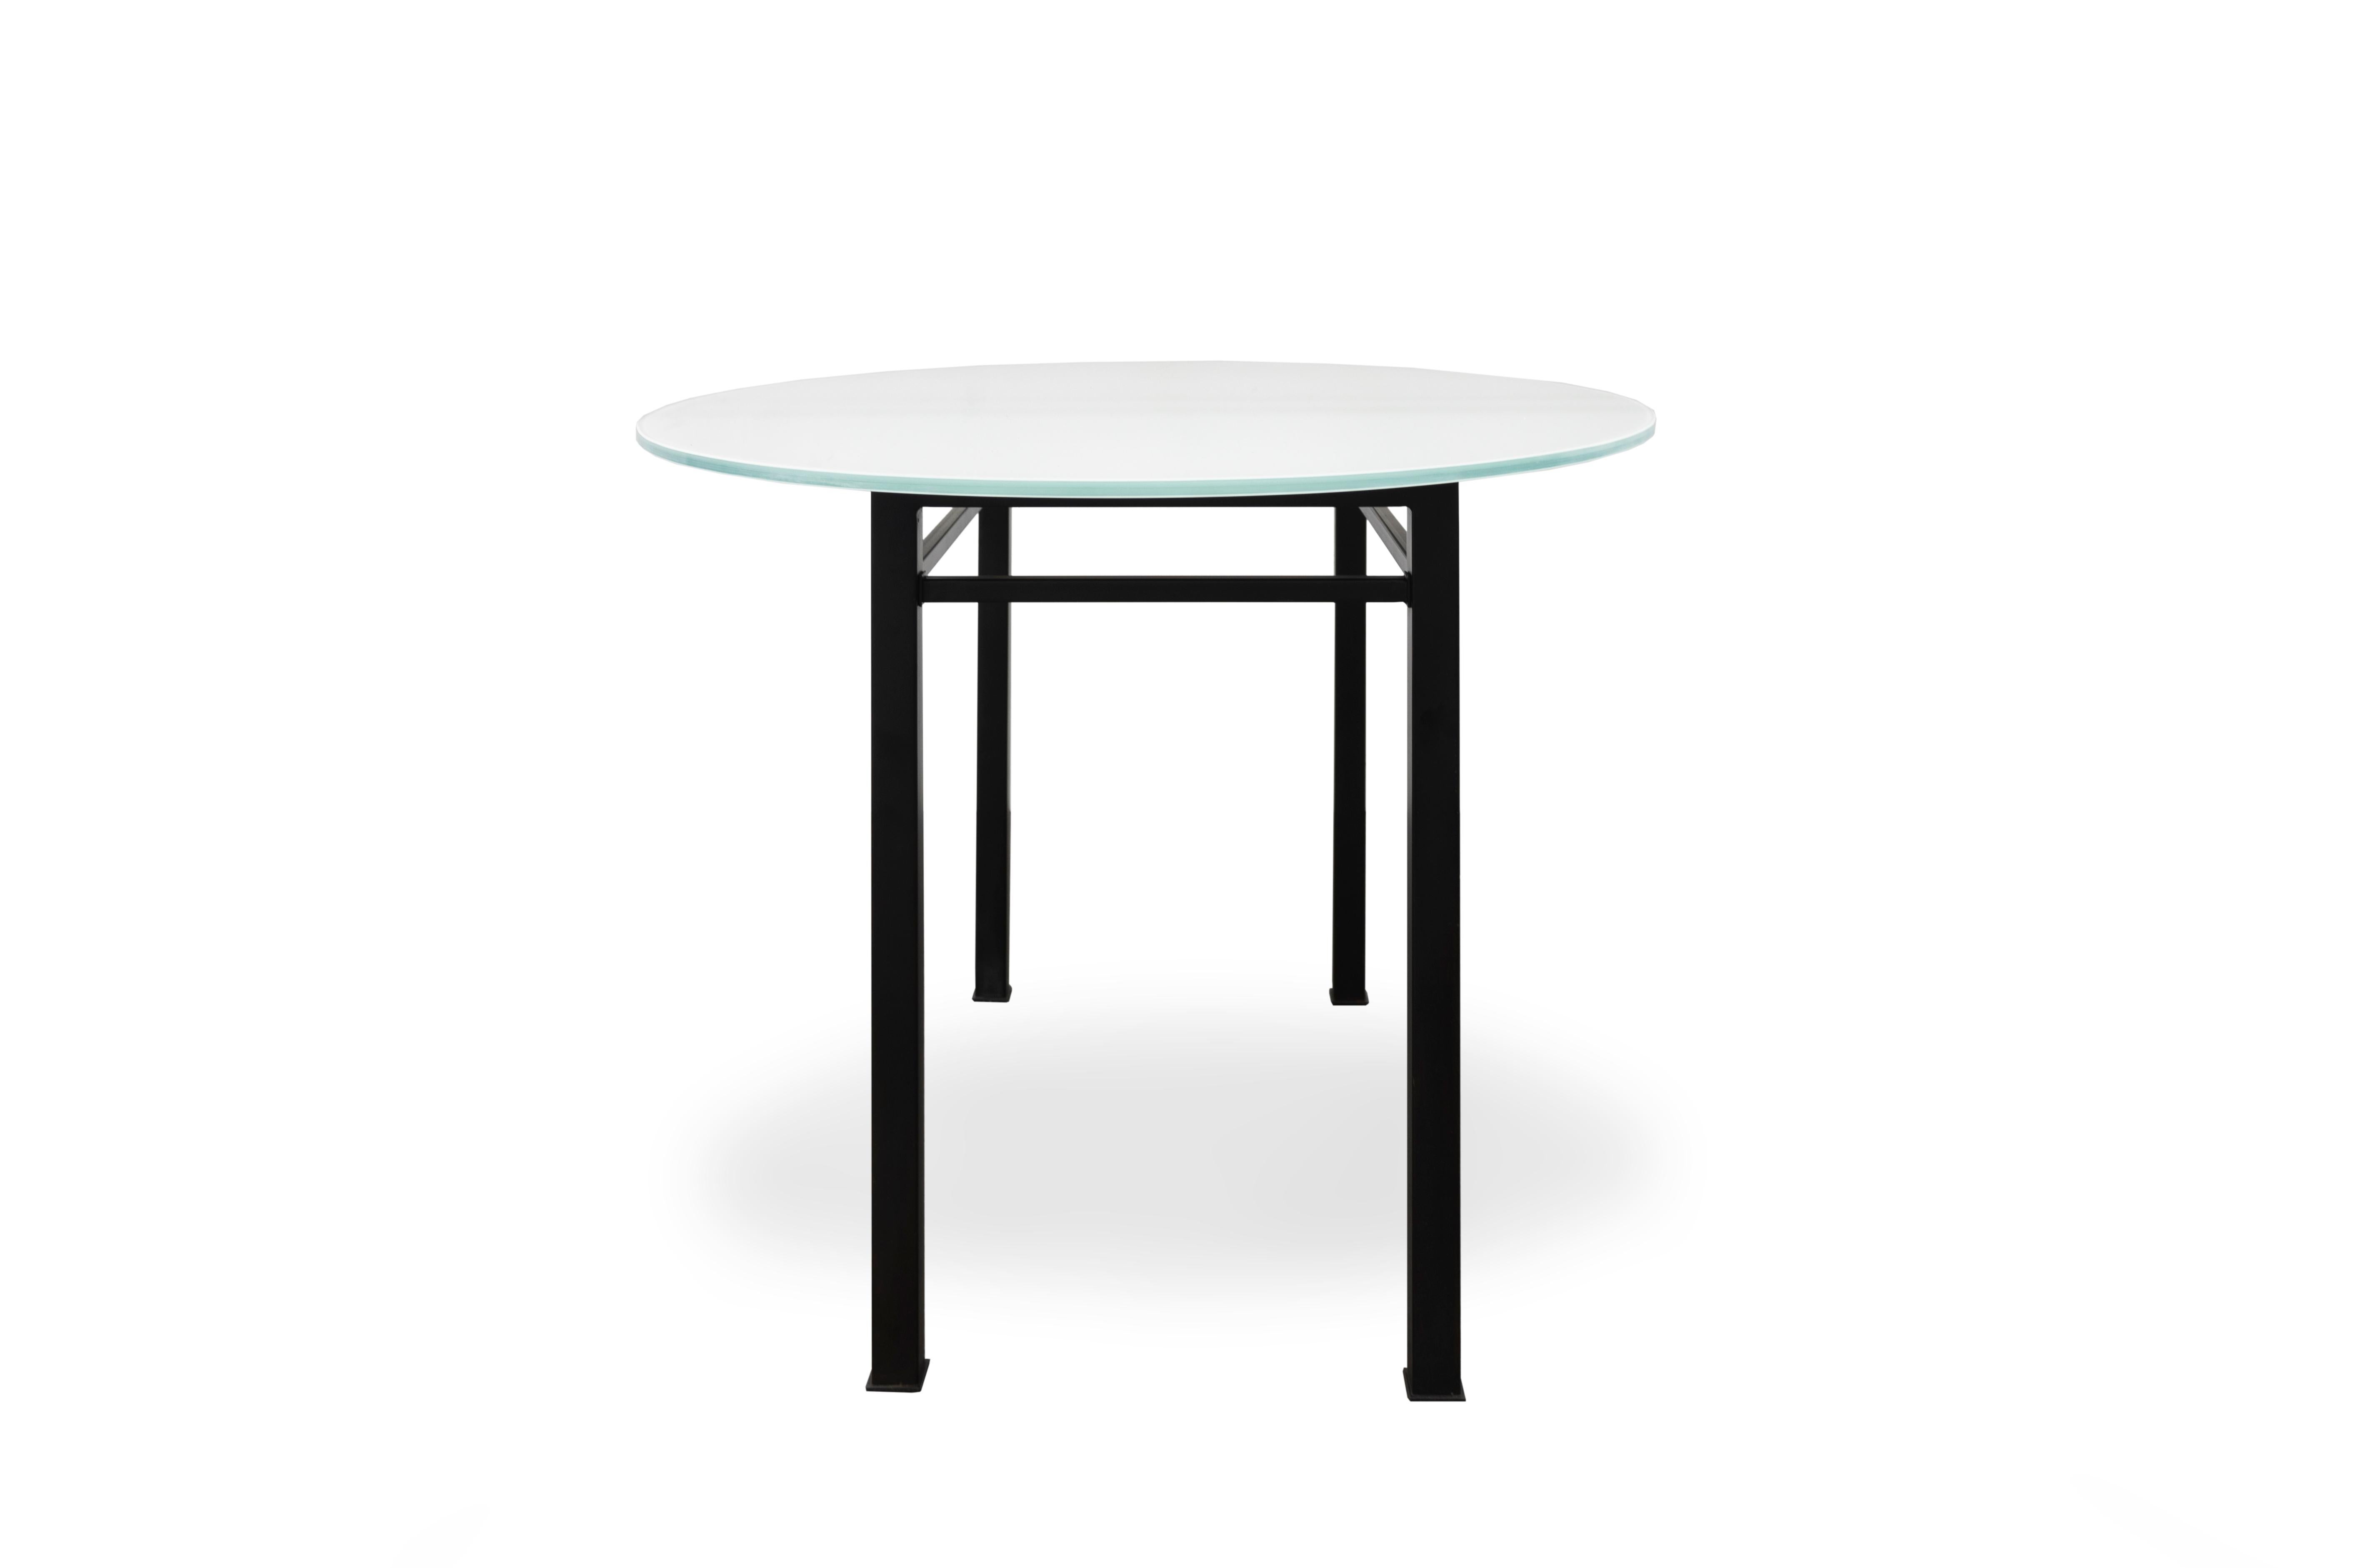 American 90° Glass & Metal Oval Dining Table, Vica designed by Annabelle Selldorf